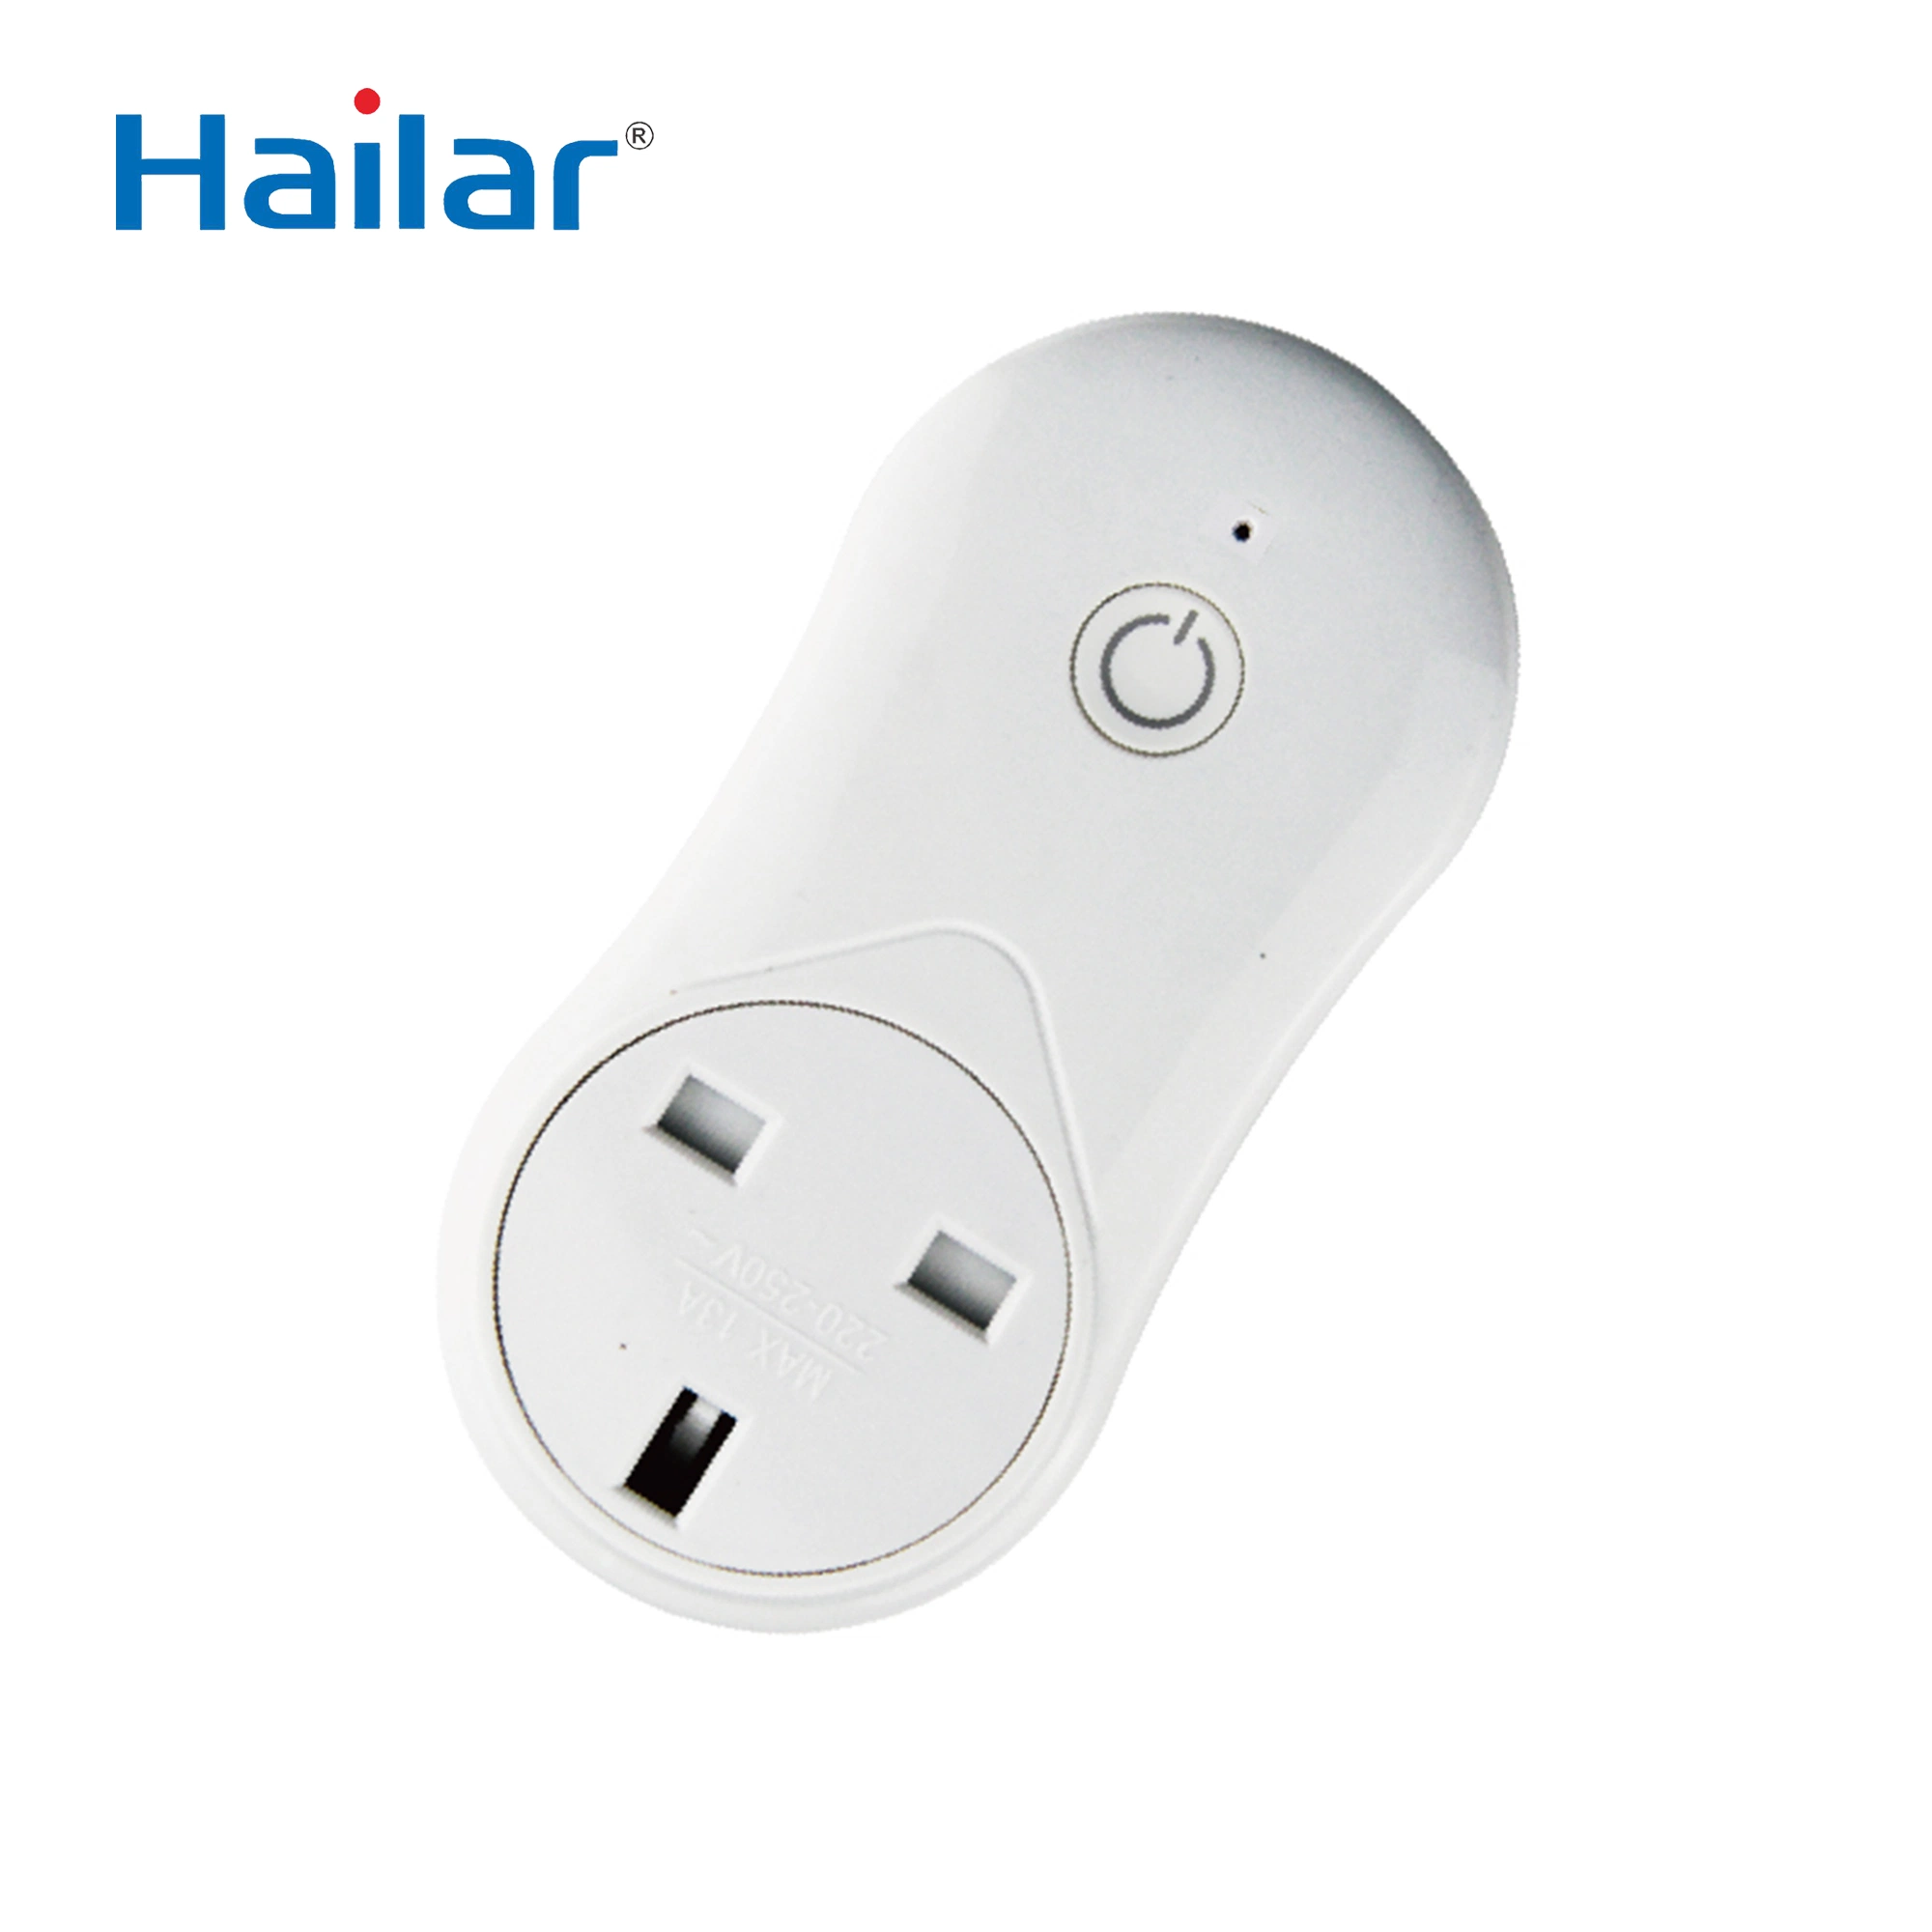 Hailar UK Standard Smart WiFi Plug with Switched Socket Support Smart Life APP with USB Outlet